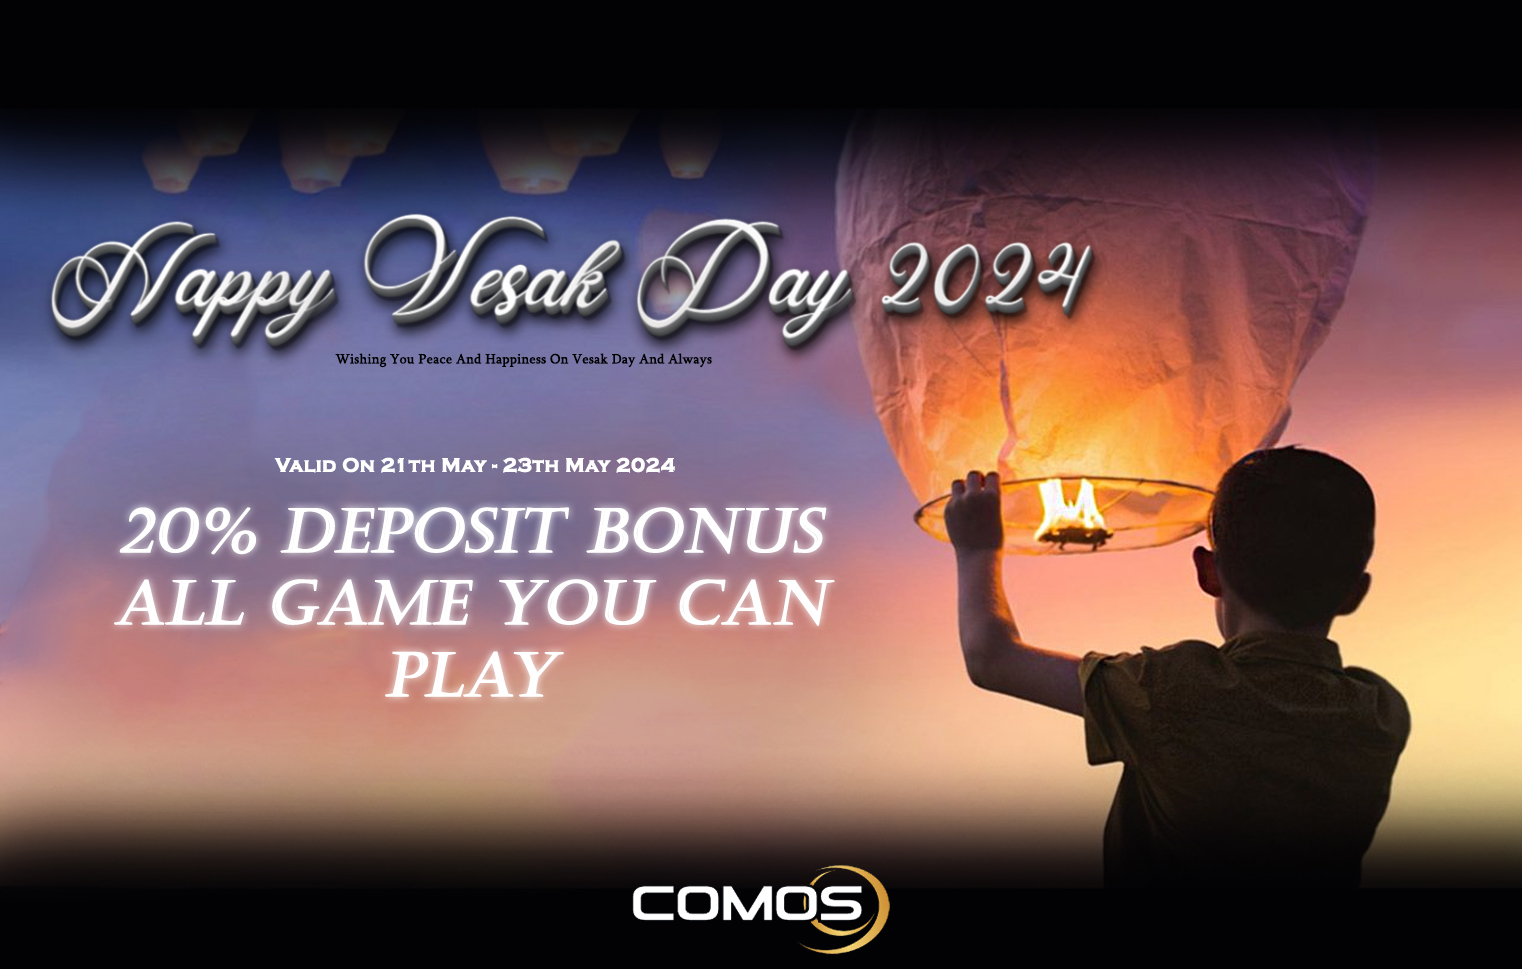 Happy Wesak Day 2024 20% Deposit Bonus All Game You Can Play ( Valid On 21th May - 23th May 2024 )